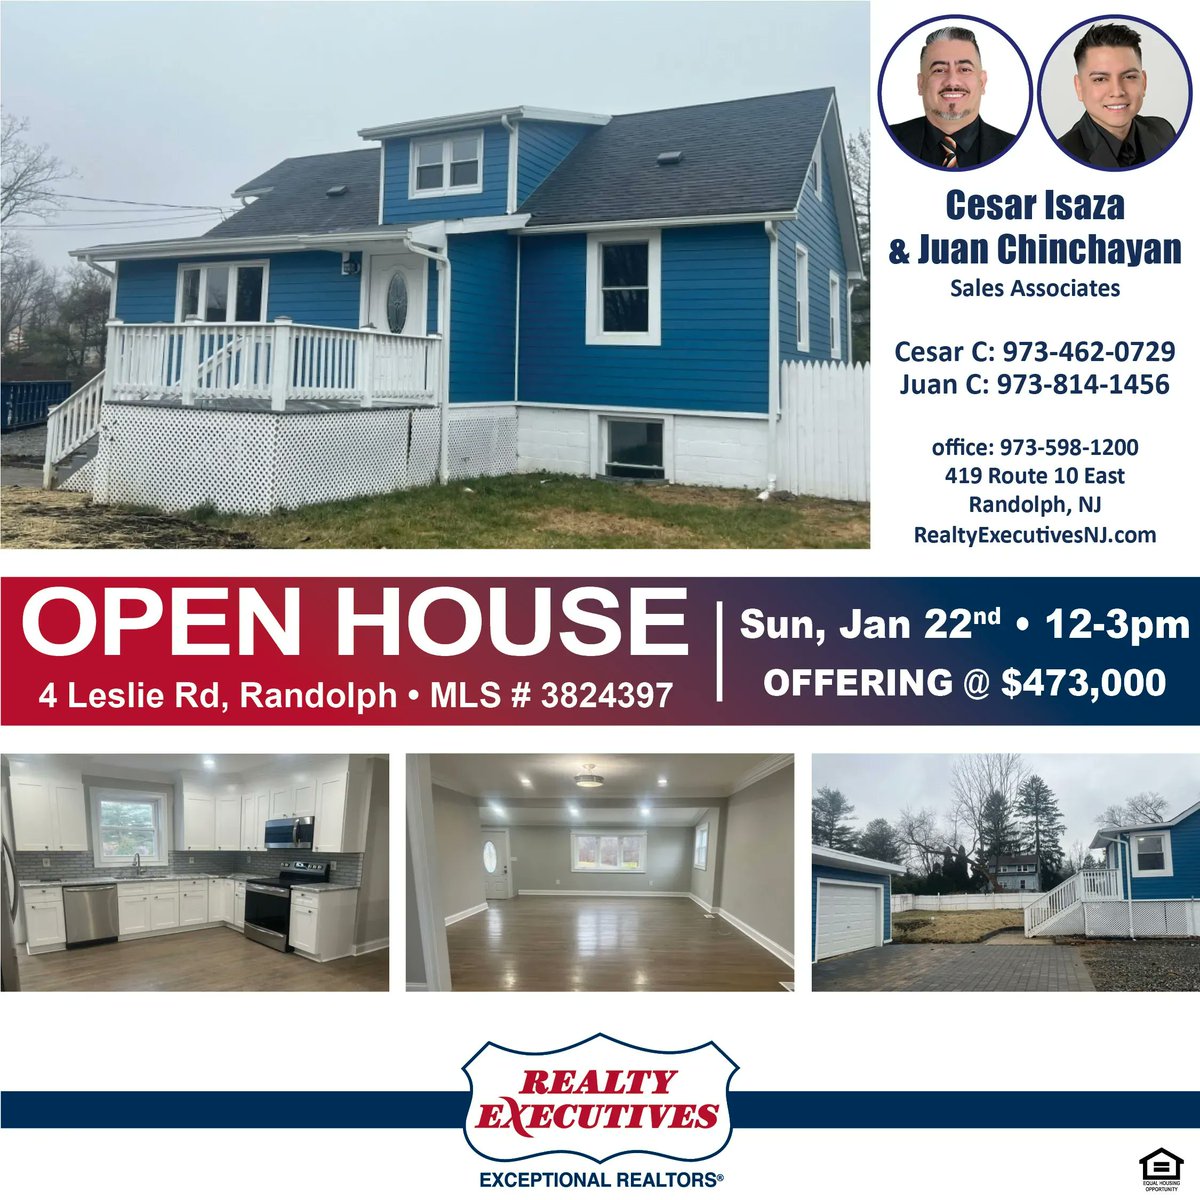 🤩OPEN HOUSE 📝Sunday, January 22nd ⌚️12pm - 3pm 💲473,000 🚗4 Leslie Rd, Randolph, NJ 🏠BEAUTIFUL 3 BED 1 BATH HOUSE IS LOCATED ON A QUIET CUL DE SAC STREET #openhouse #randolphnj #sunday #renovated #newhome #dreamhome #homebuyers #househunters